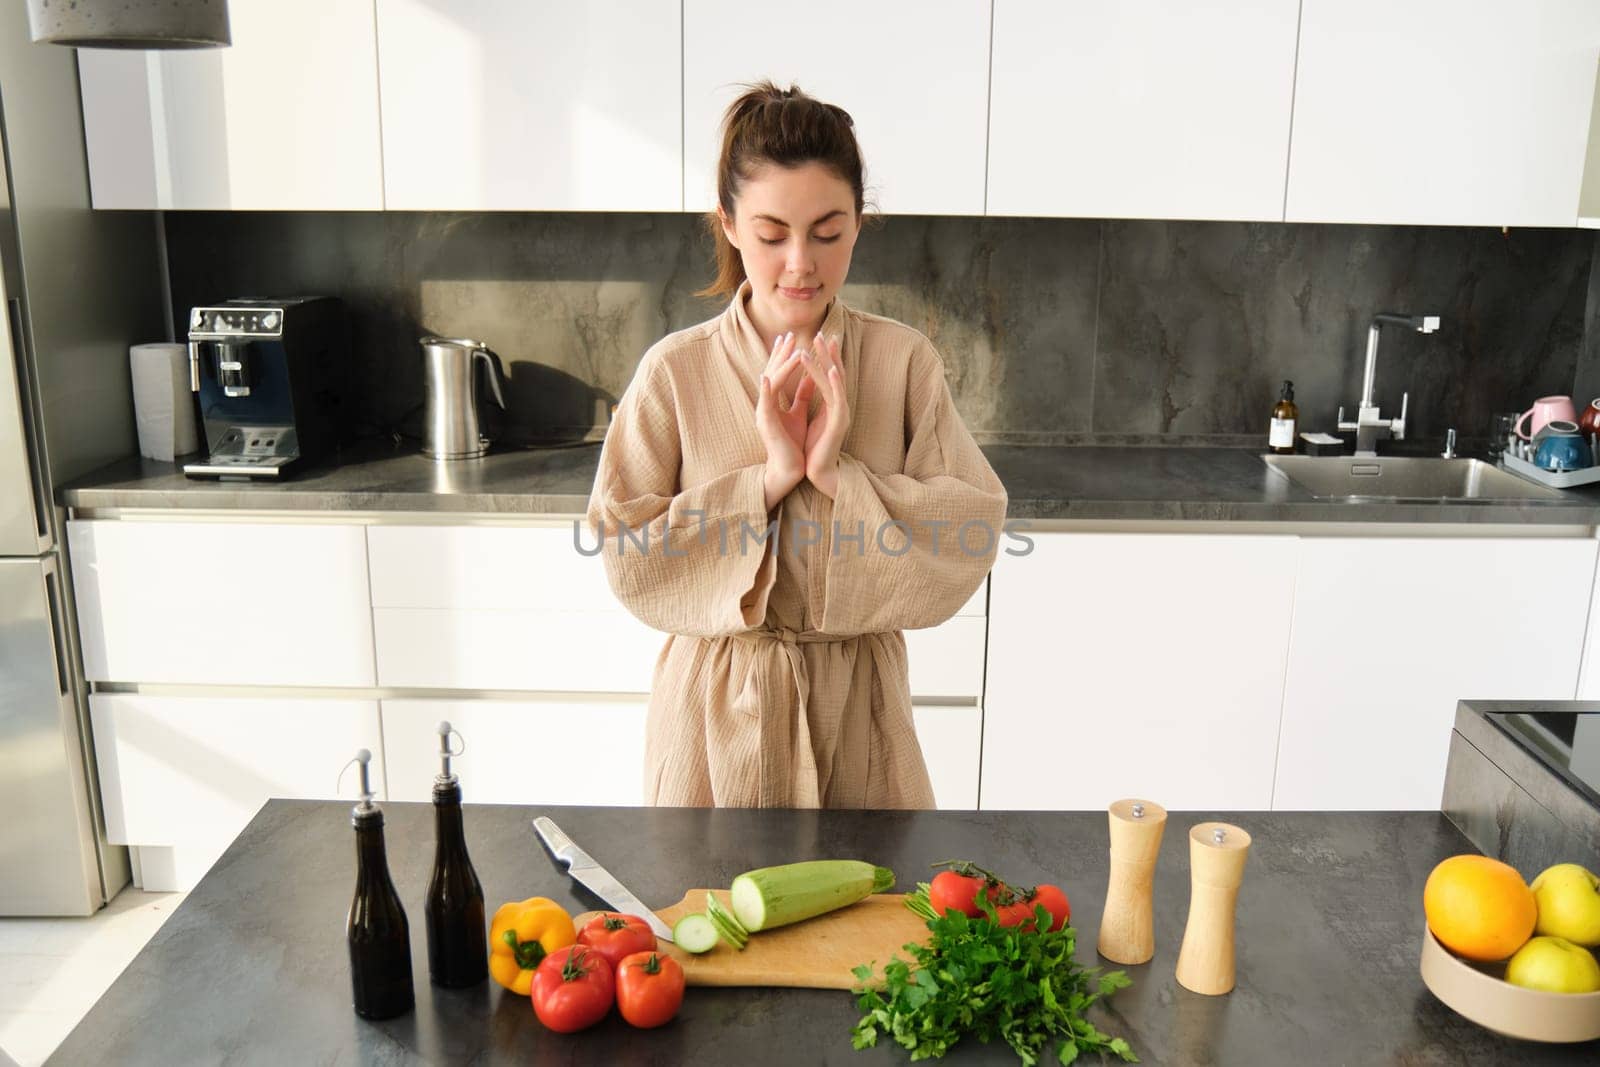 Portrait of excited woman looks thoughtful at chopping board with zucchini, vegetables, preparing healthy salad, making vegetarian meal, choosing what to have for dinner, standing in kitchen.